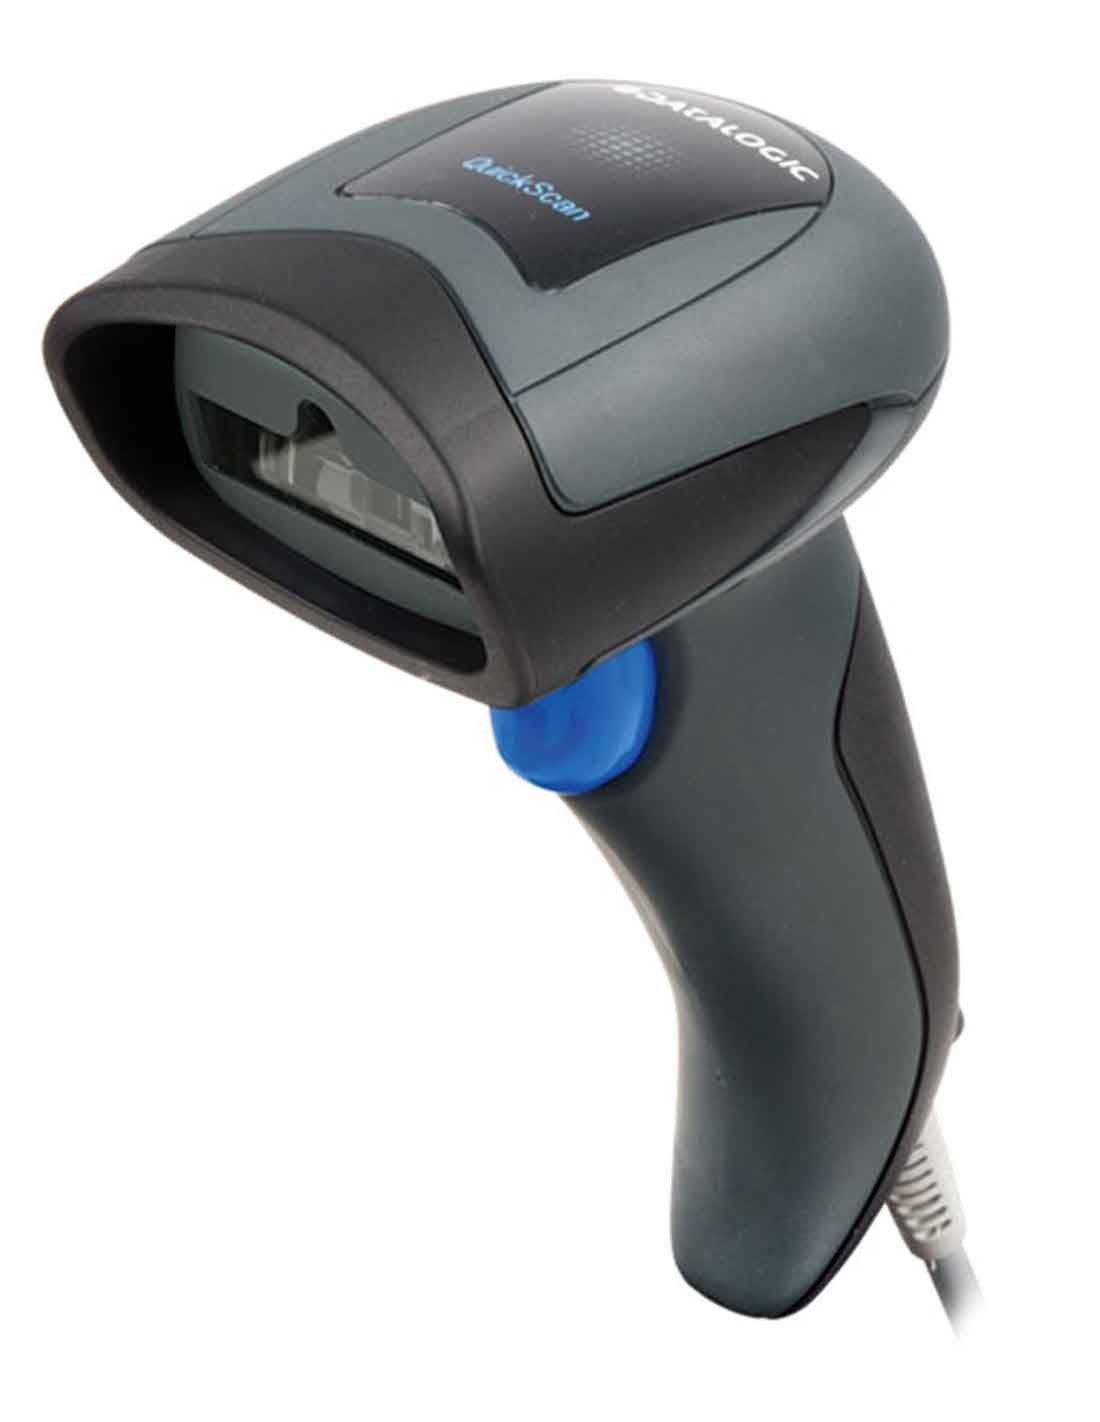 Datalogic QD2131 Handheld Scanner has a small and ergonomic design and buy online at a cheap price in Dubai